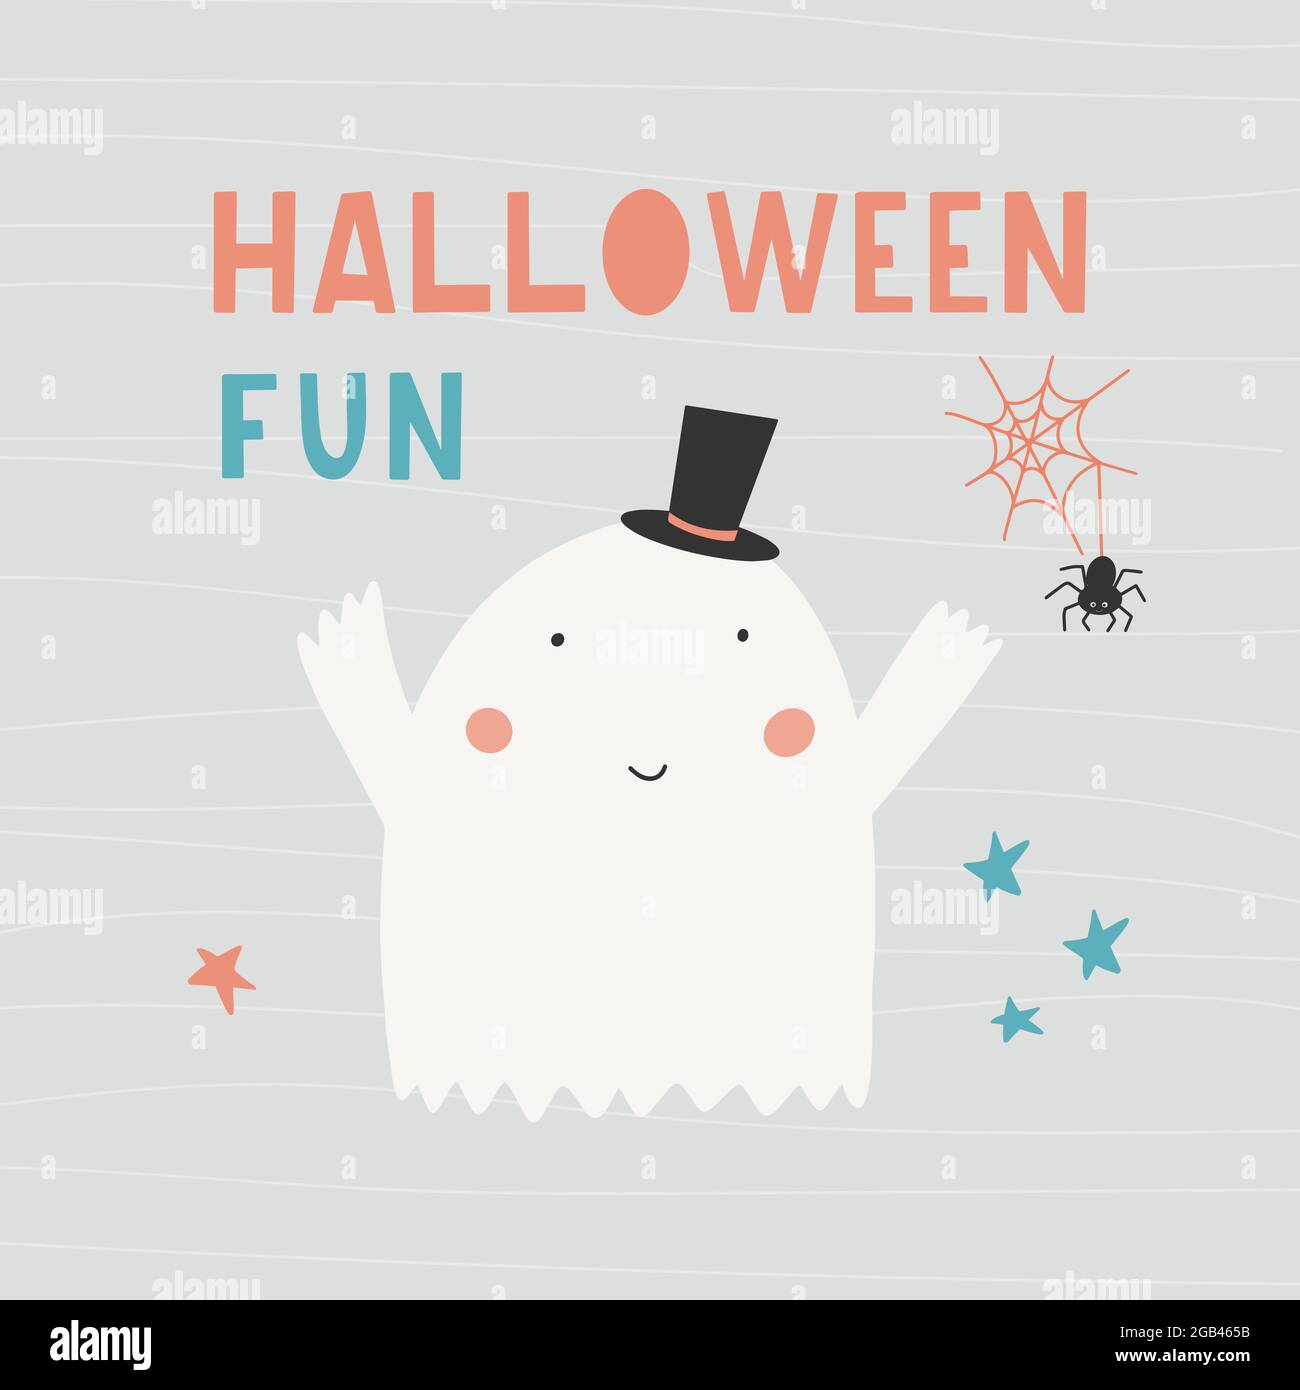 Halloween lettering - Halloween fun - with a cute ghost. Stock Vector